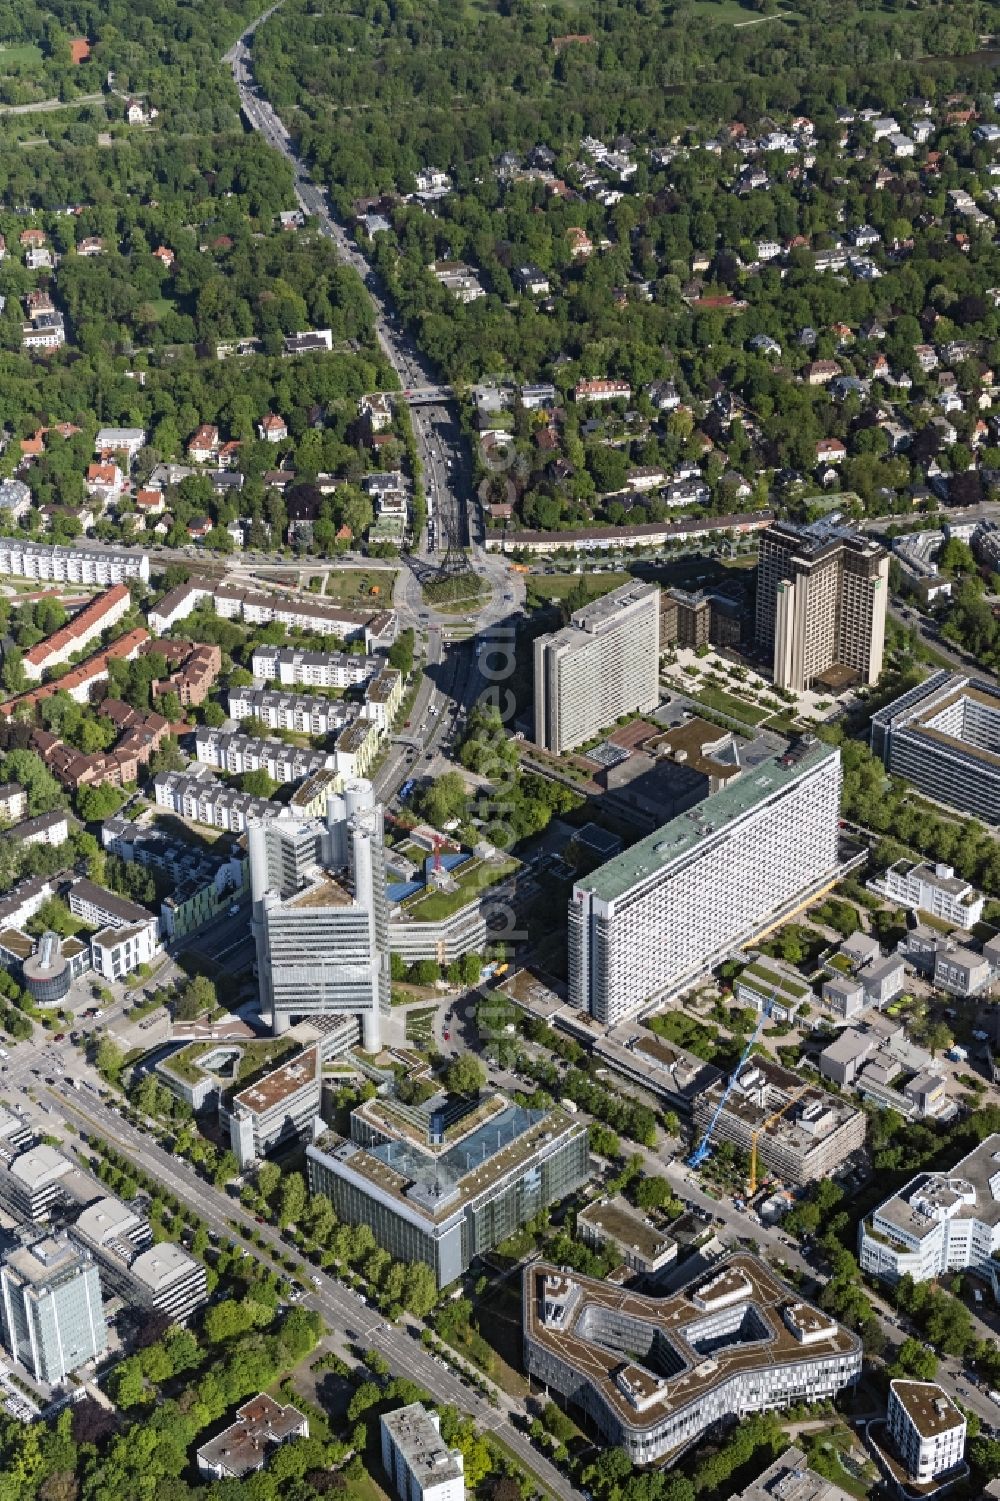 Aerial image München - Tower of HVB - UniCredit Bank and the Sheraton Munich Arabellapark Hotel in Bogenhausen district of Munich in Bavaria